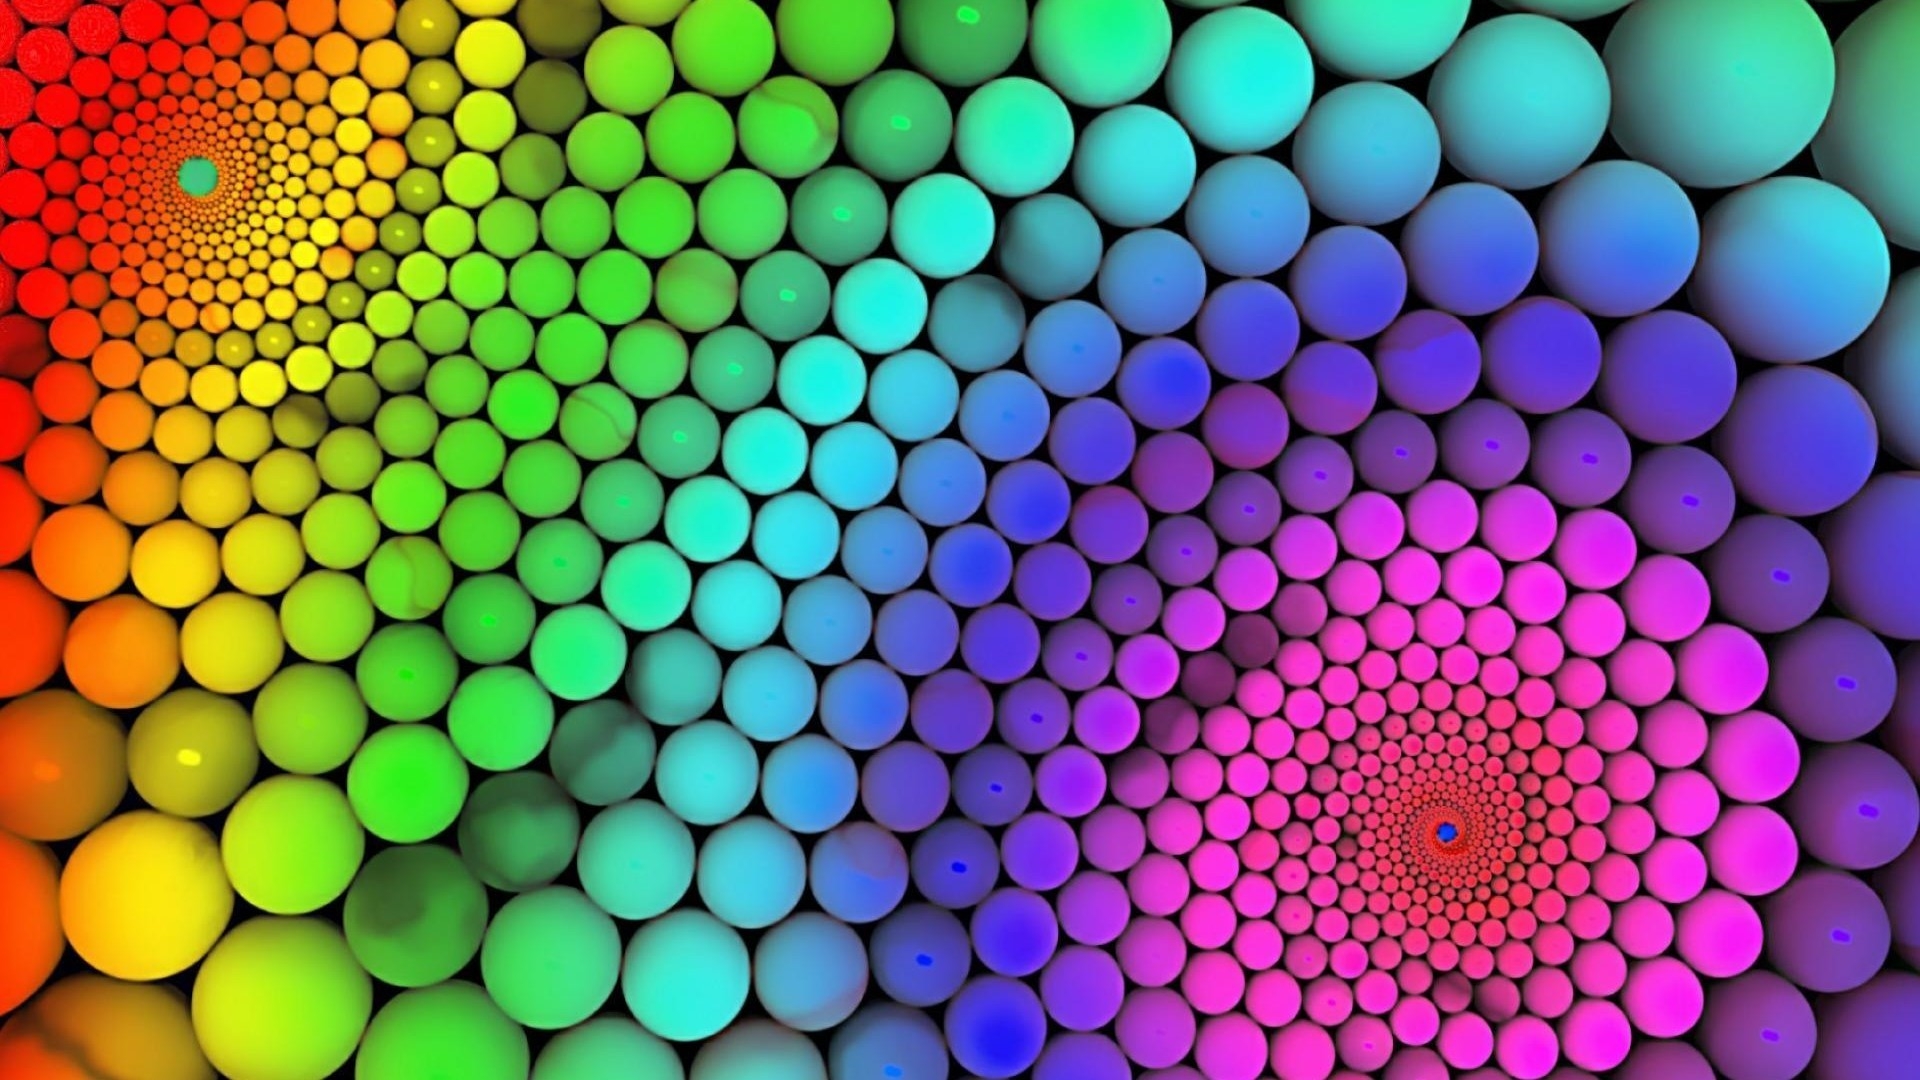 Colourful Balls for 1920 x 1080 HDTV 1080p resolution